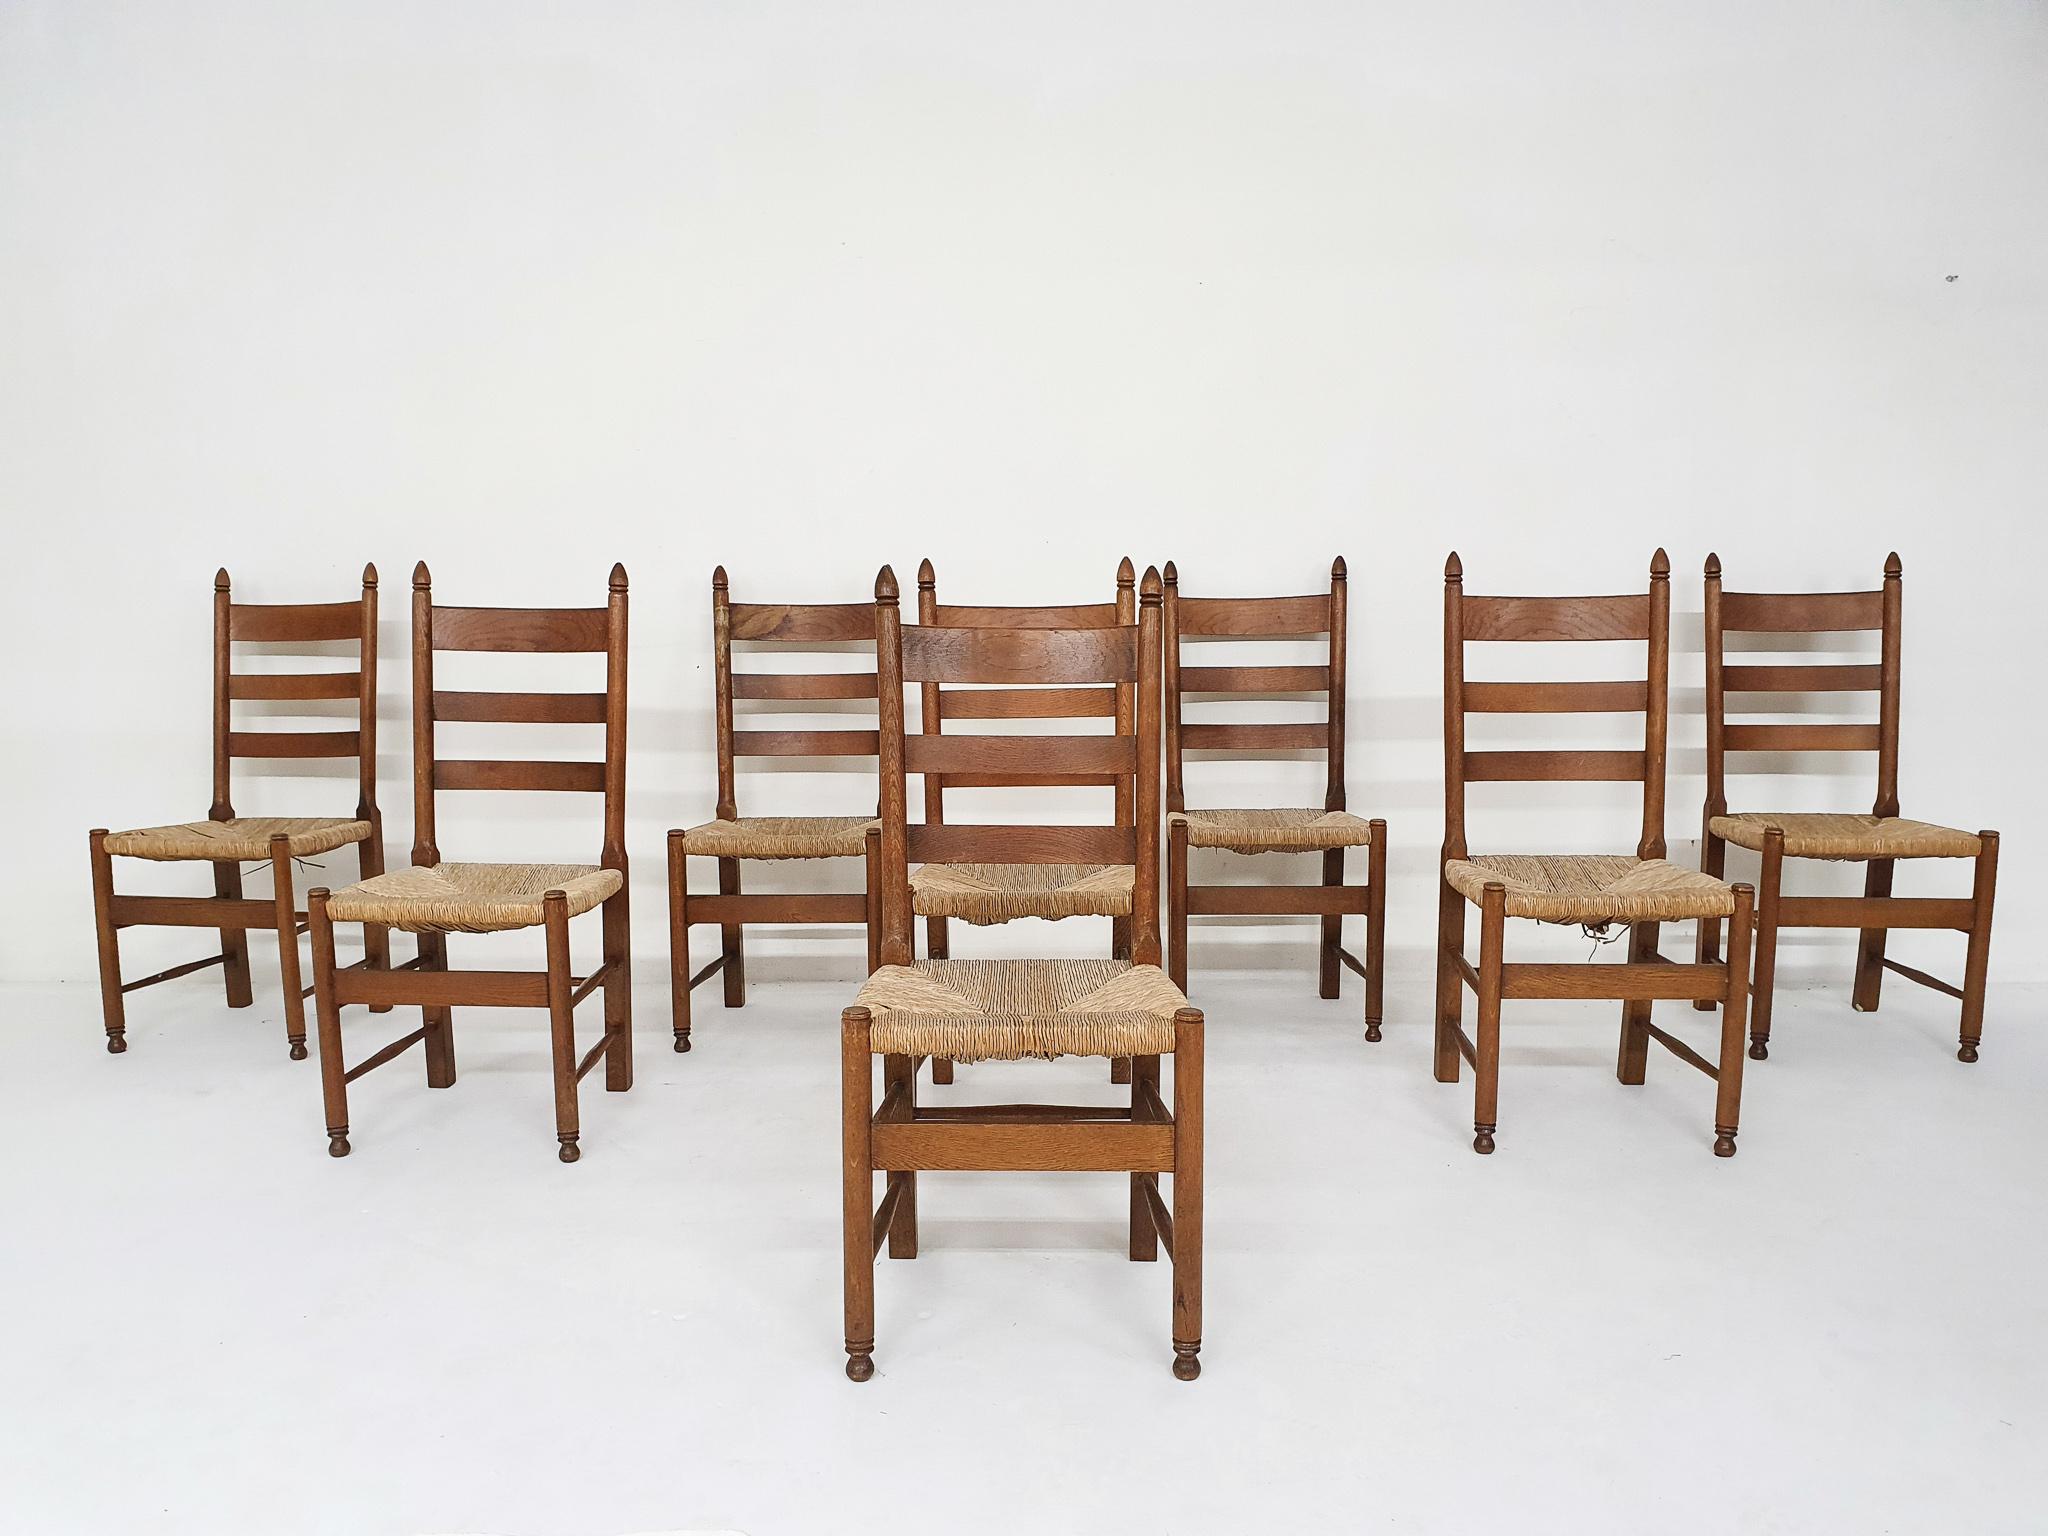 Oak dining chairs with rope weaving seating.
We have 22 available, 12 are in good condition, 10 have trace of use to the wood or seating, but can still be used well.